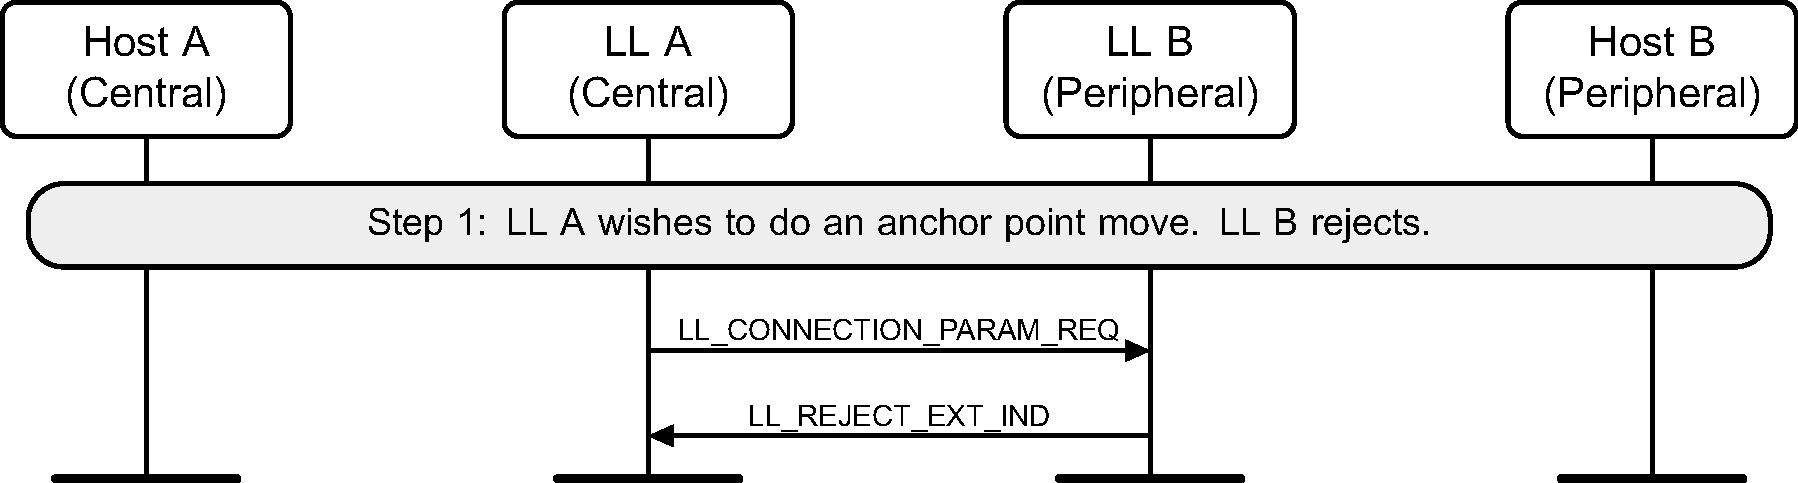 Central-initiated Connection Parameters Request procedure – Central requests a change in anchor points, Peripheral rejects